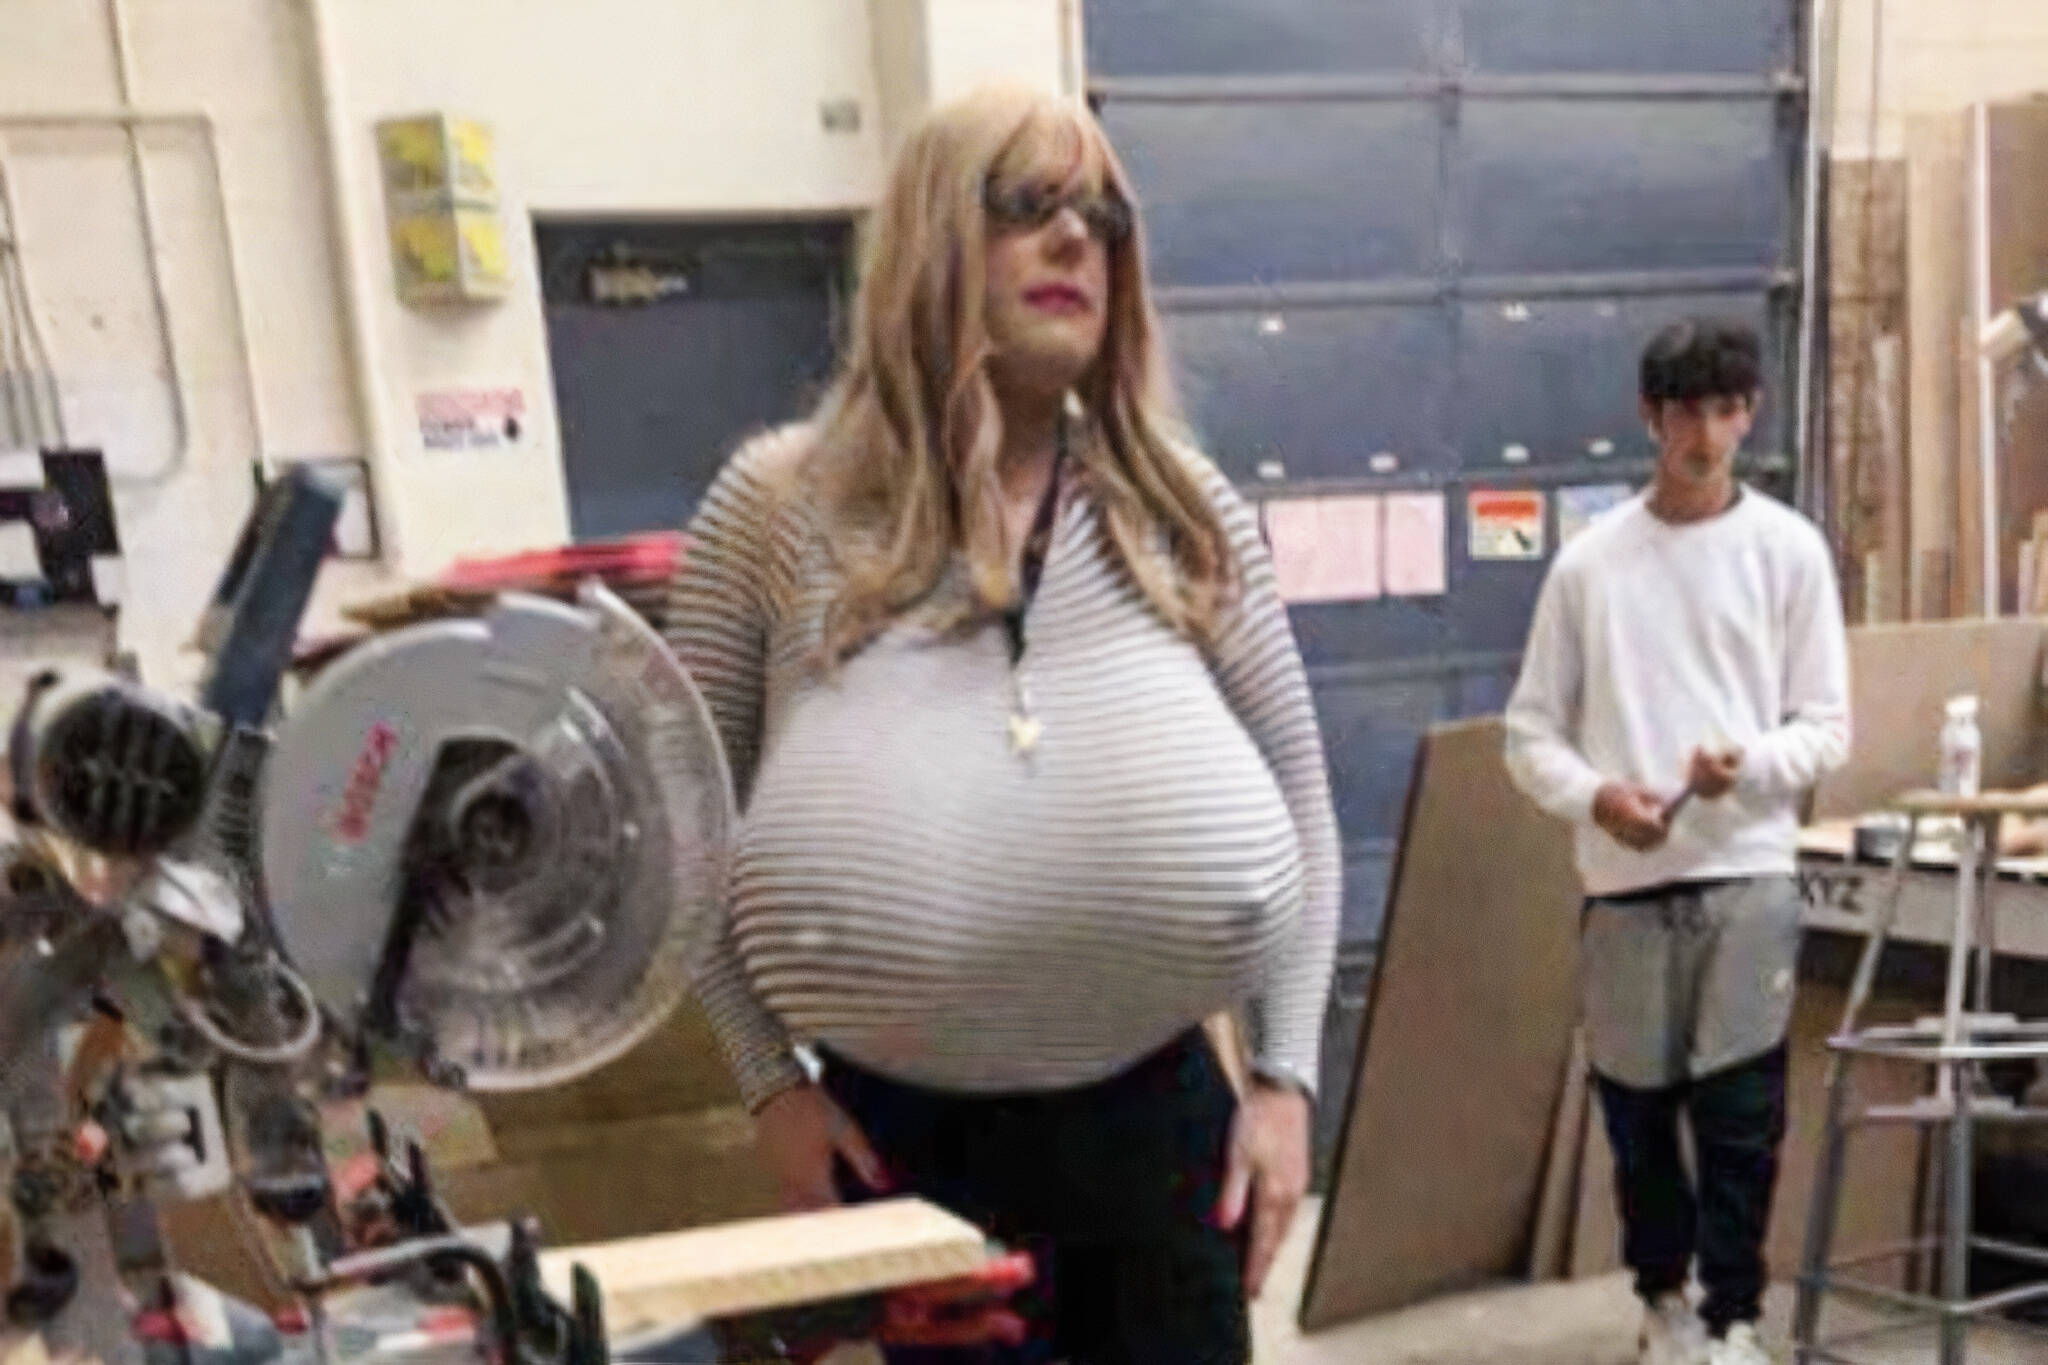 Oakville teacher shocks students by wearing huge prosthetic breasts to shop  class